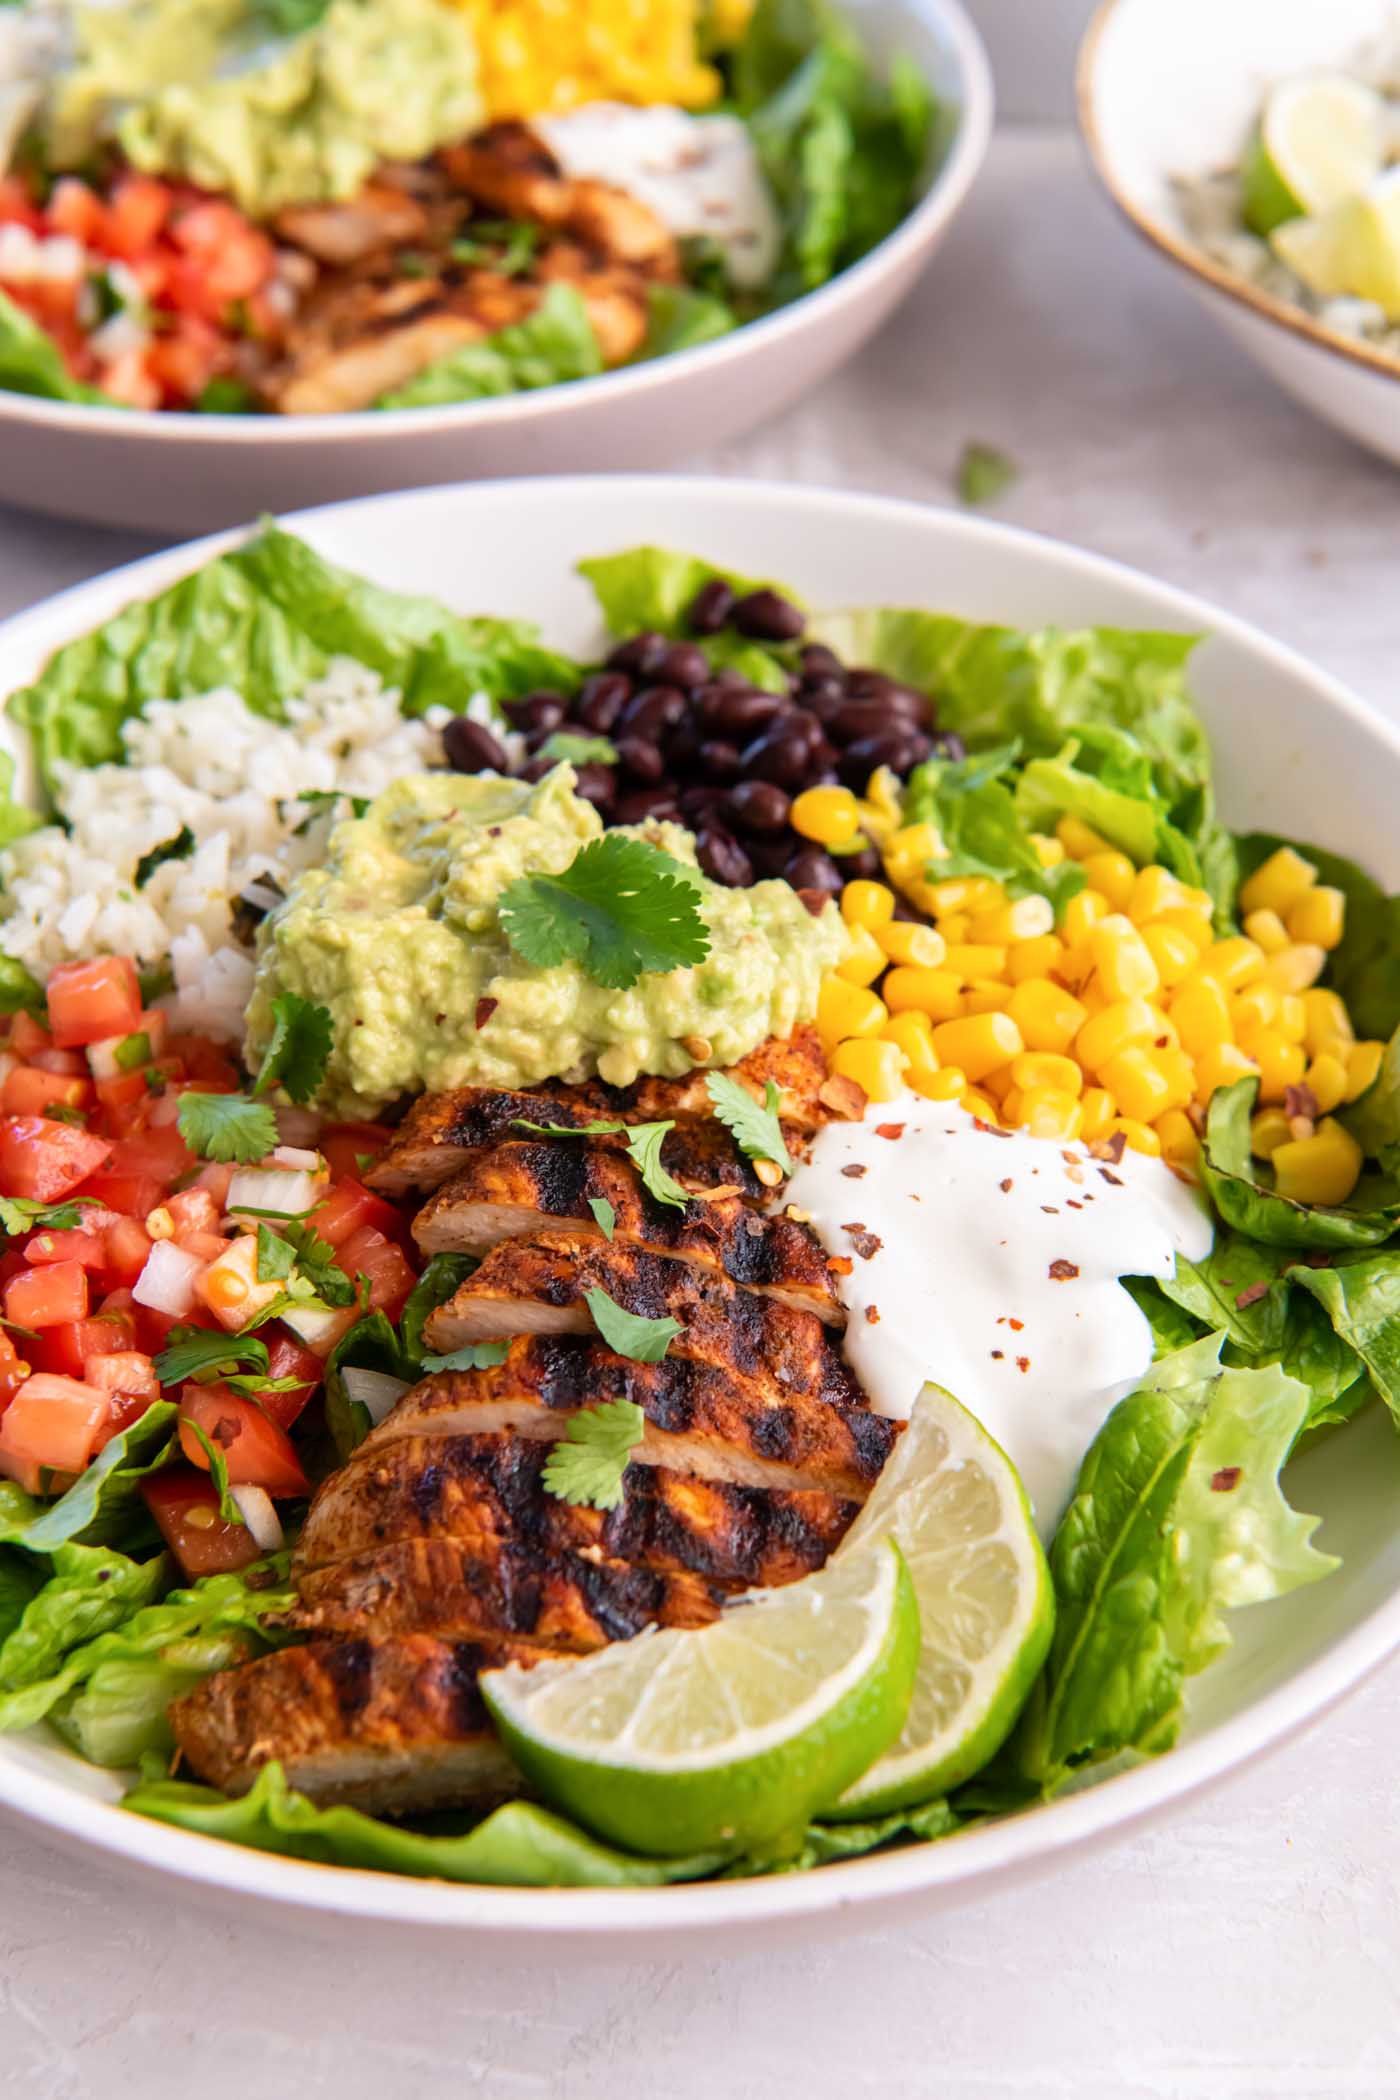 Chicken burrito bowl with ingredients placed in different sections of the bowl, with lime wedge garnish.